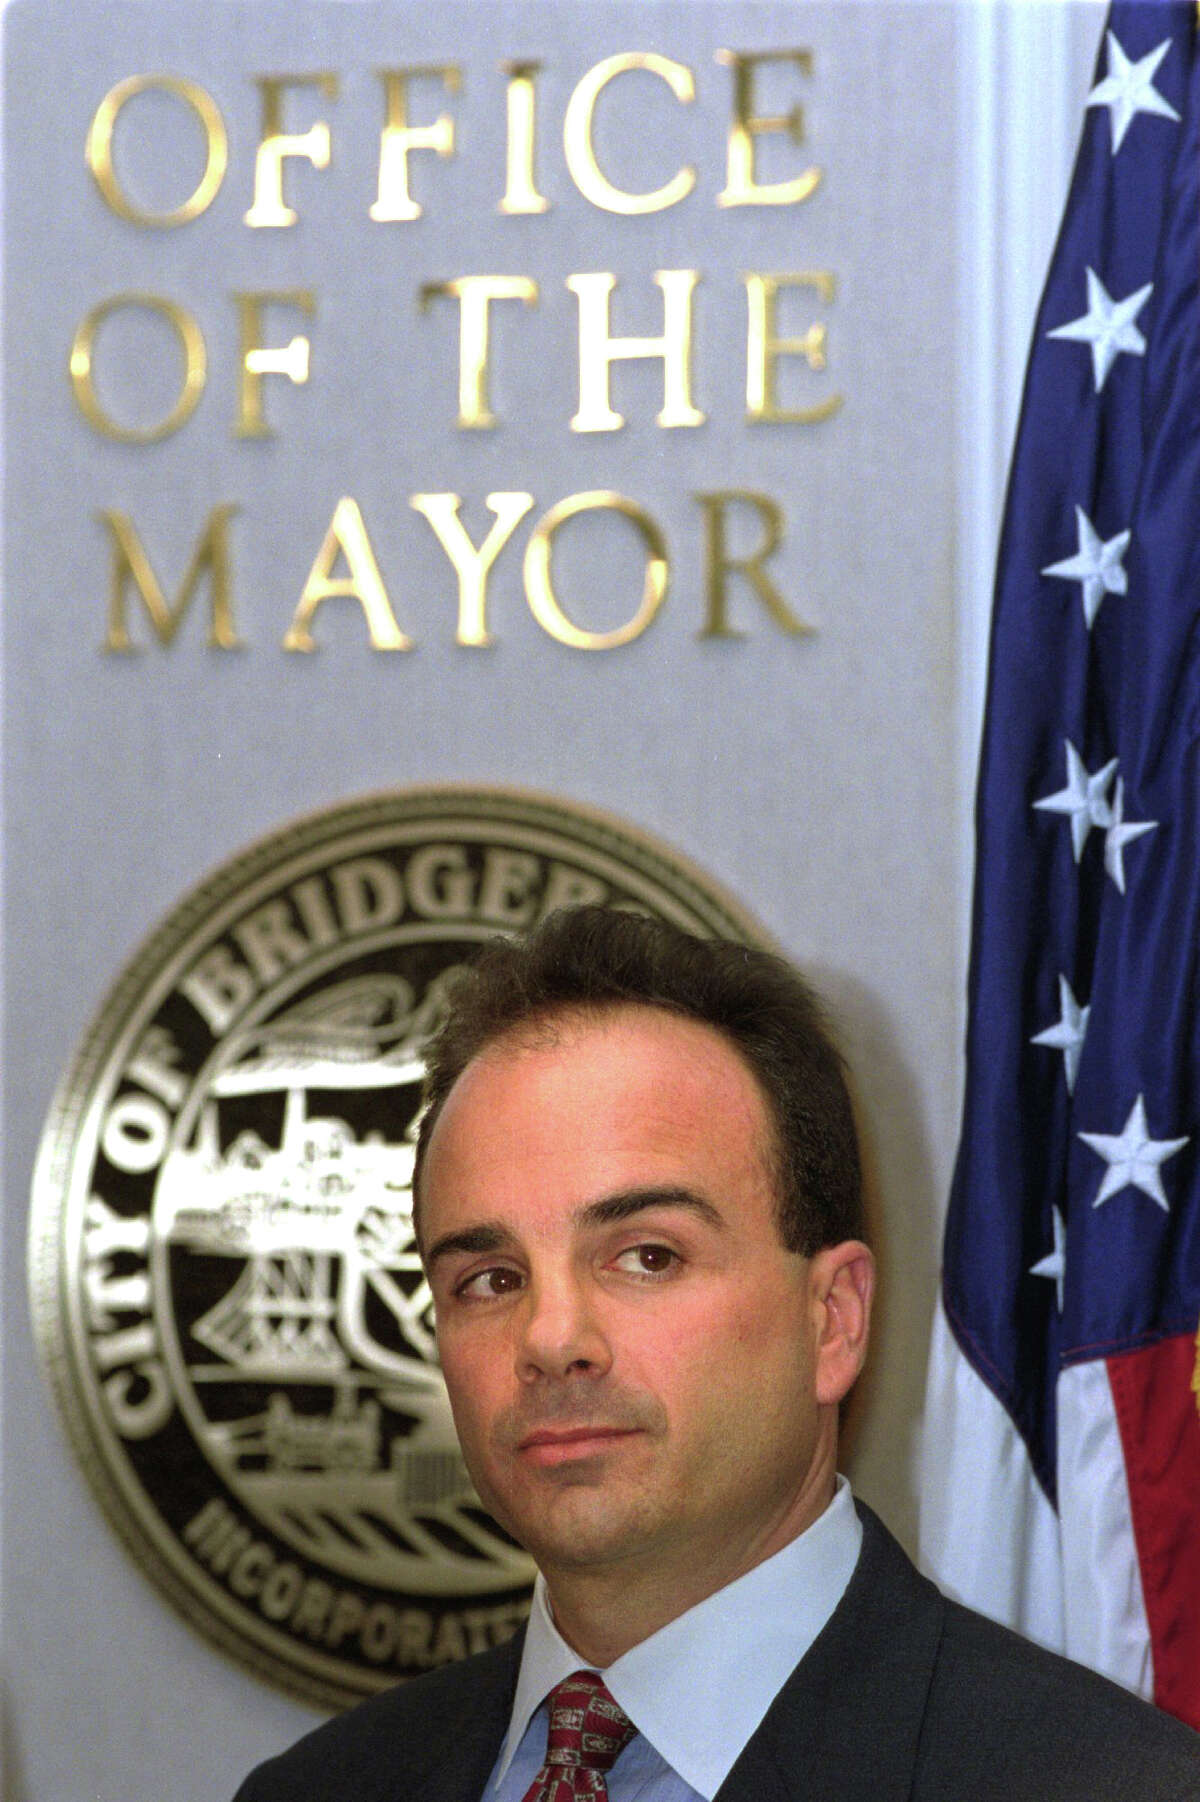 Bridgeport Mayor Joseph P. Ganim looks on Oct. 31st, 2001, during a press conference outside the Office of the Mayor at City Hall Annex on the day a federal grand jury indicted him on 24 felony charges including racketeering, bribery, extortion, mail fraud and tax evasion.